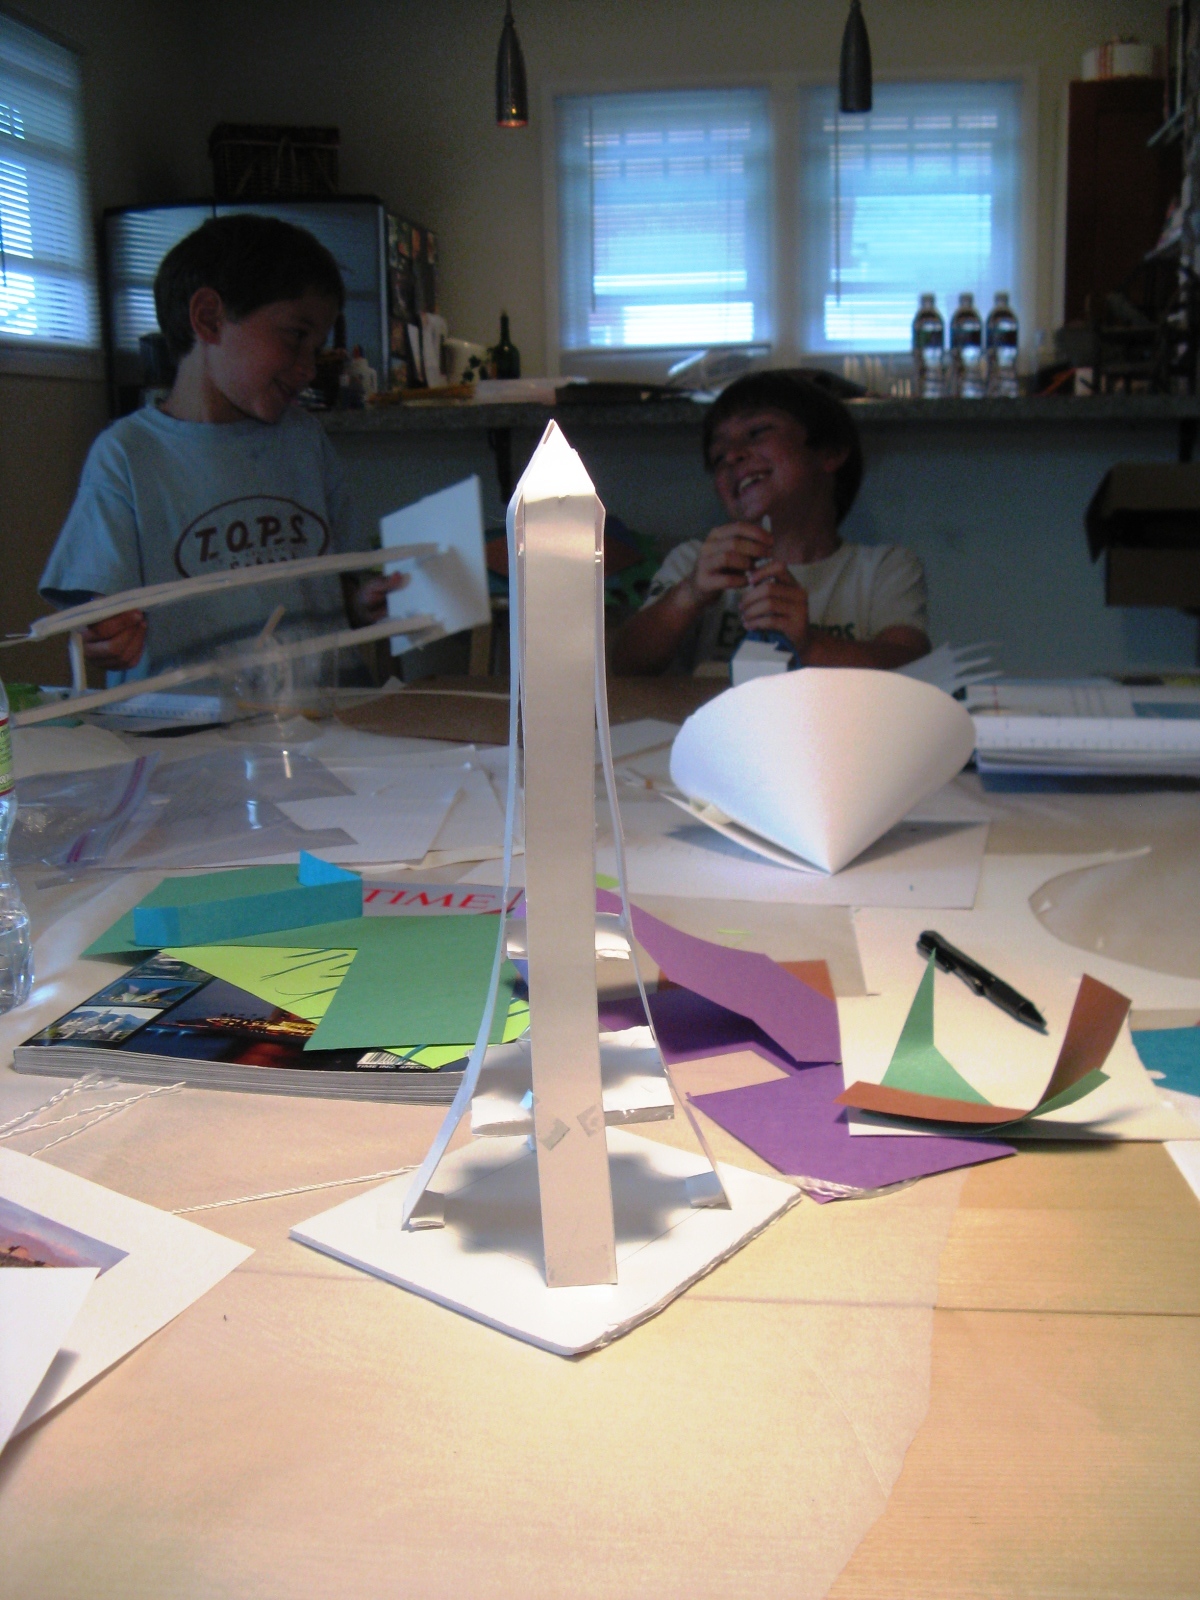 Student's Projects  Architecture 101 for Kids and Teens